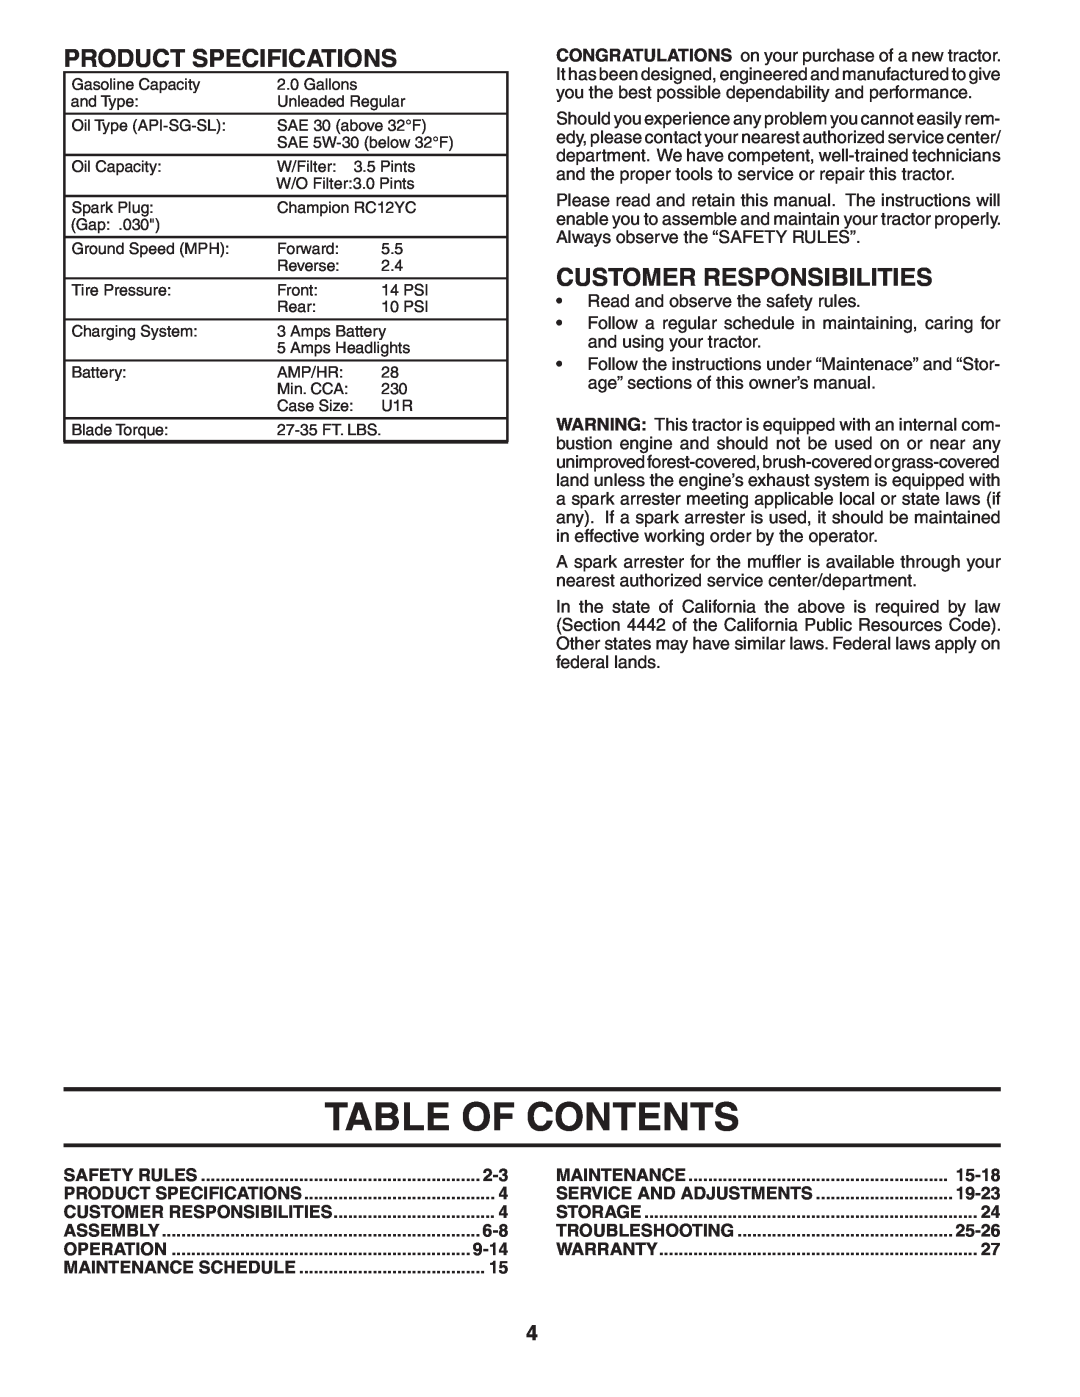 Poulan 403444 manual Table Of Contents, Product Specifications, Customer Responsibilities, 9-14, 15-18, 19-23, 25-26 